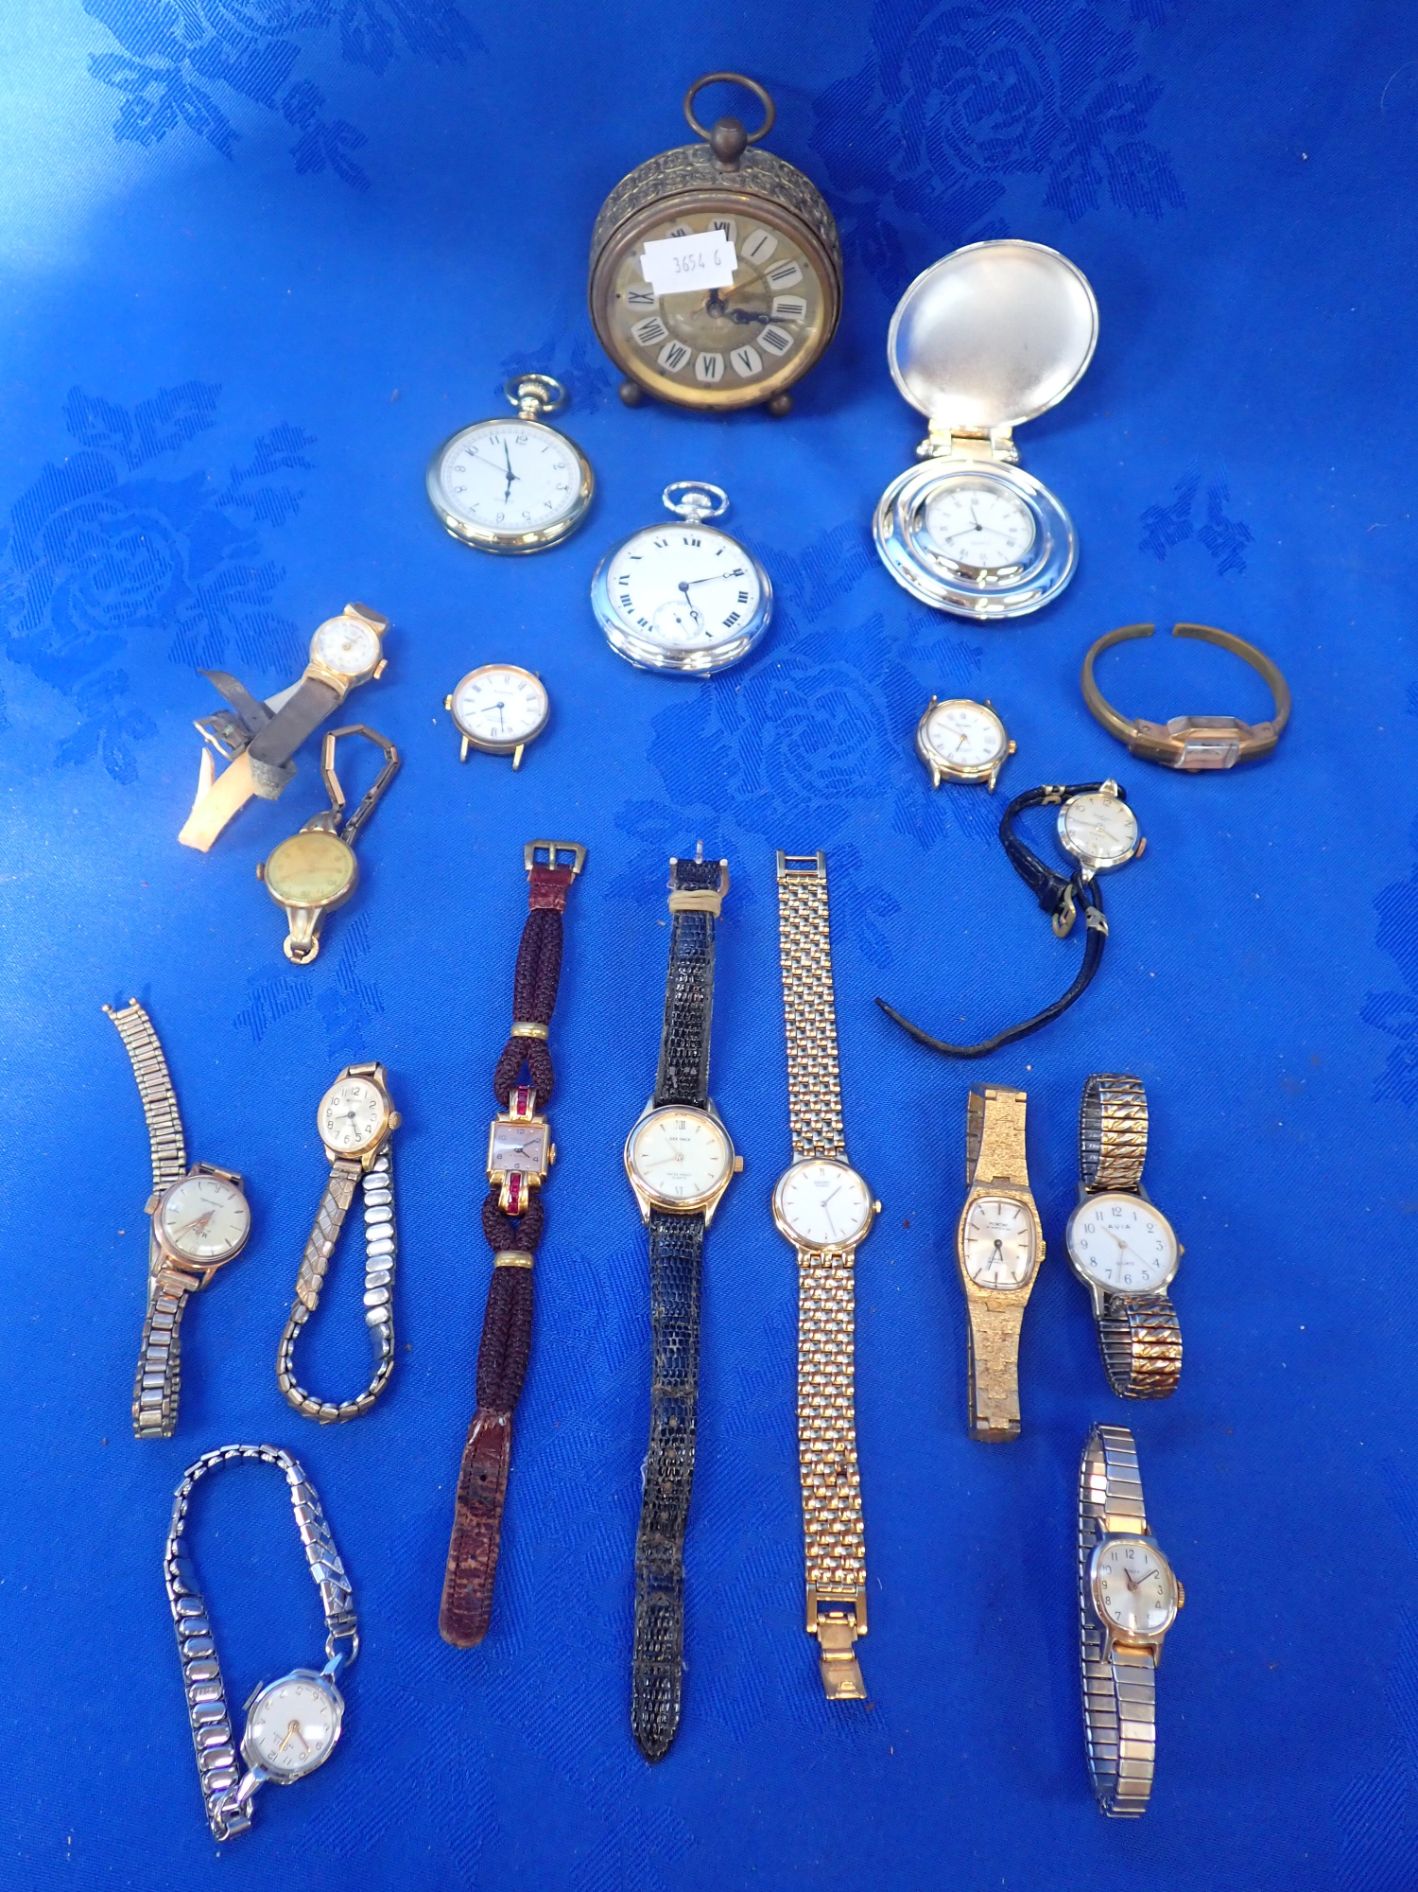 A COLLECTION OF WATCHES AND CLOCKS